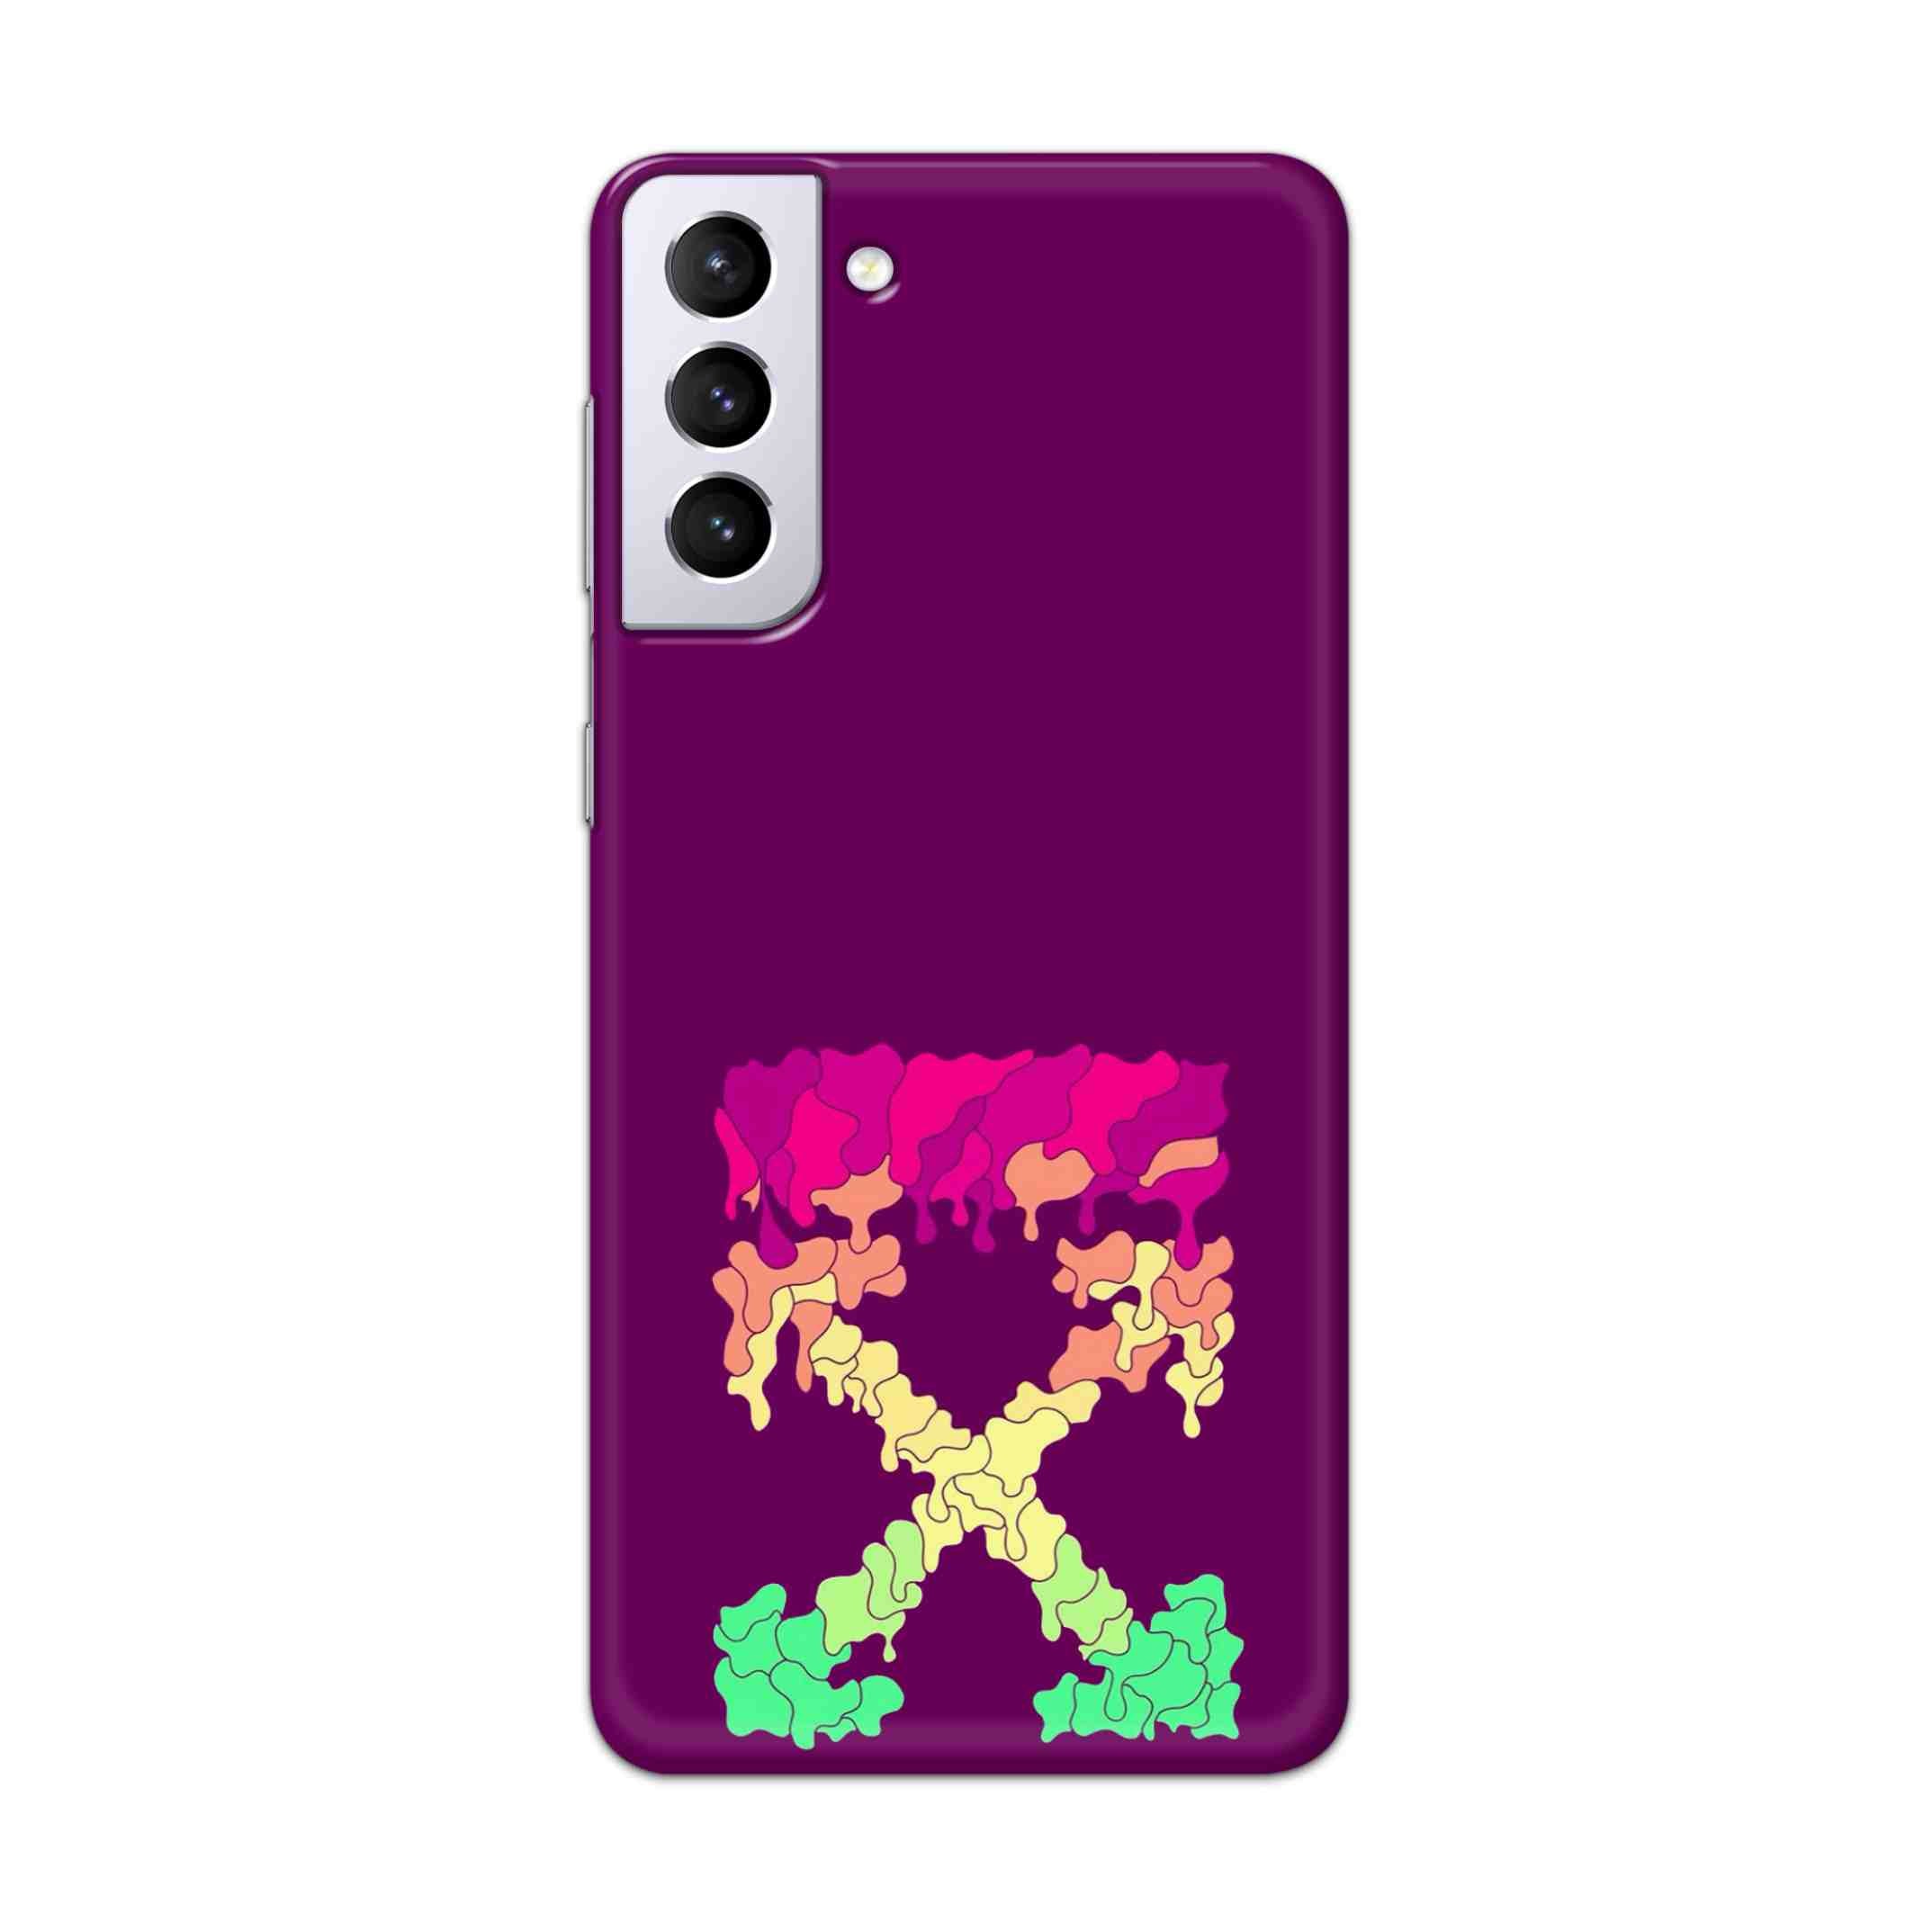 Buy X.O Hard Back Mobile Phone Case Cover For Samsung Galaxy S21 Online